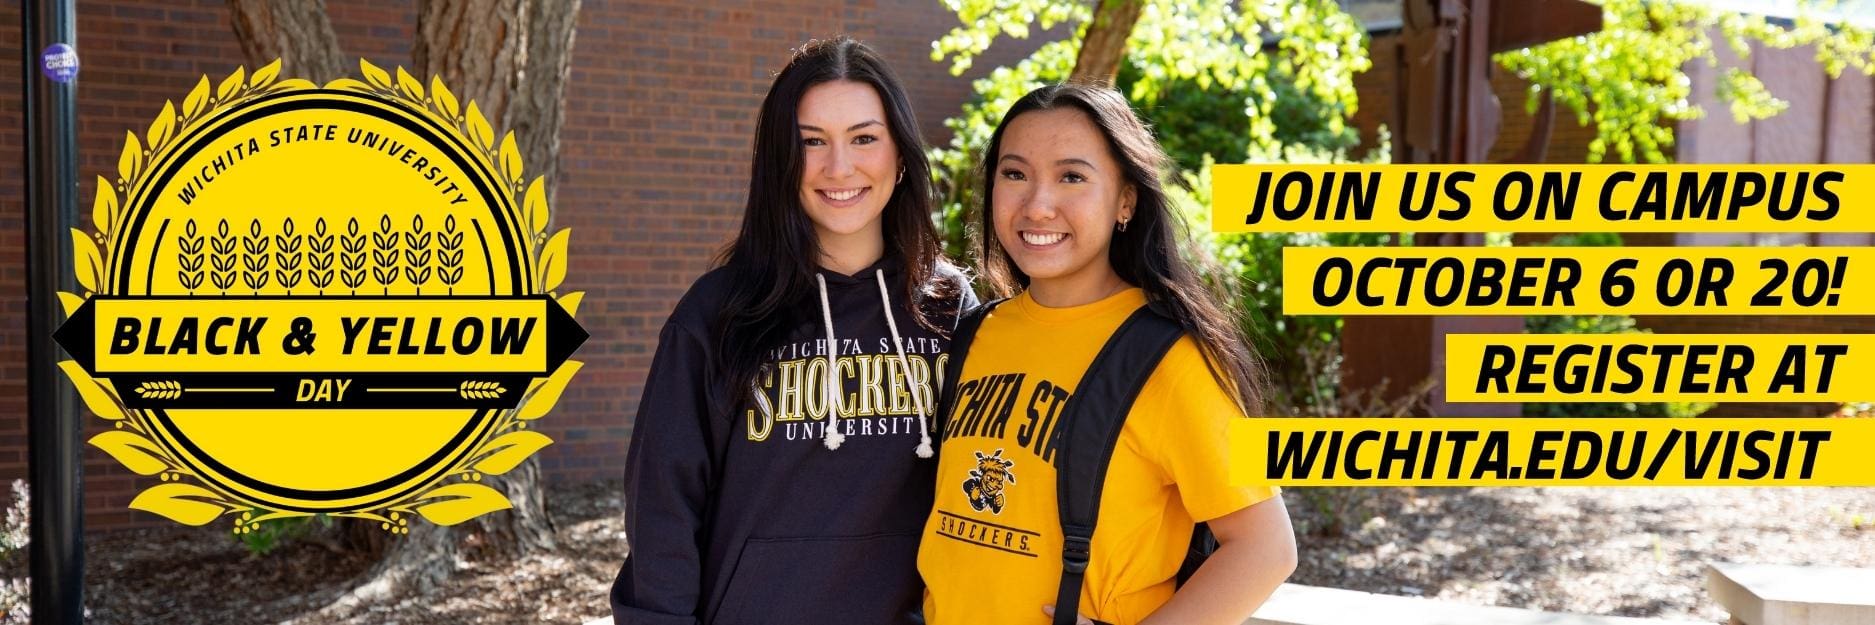 Black & Yellow Day: Join us on campus October 6 or October 20! Register at wichita.edu/visit